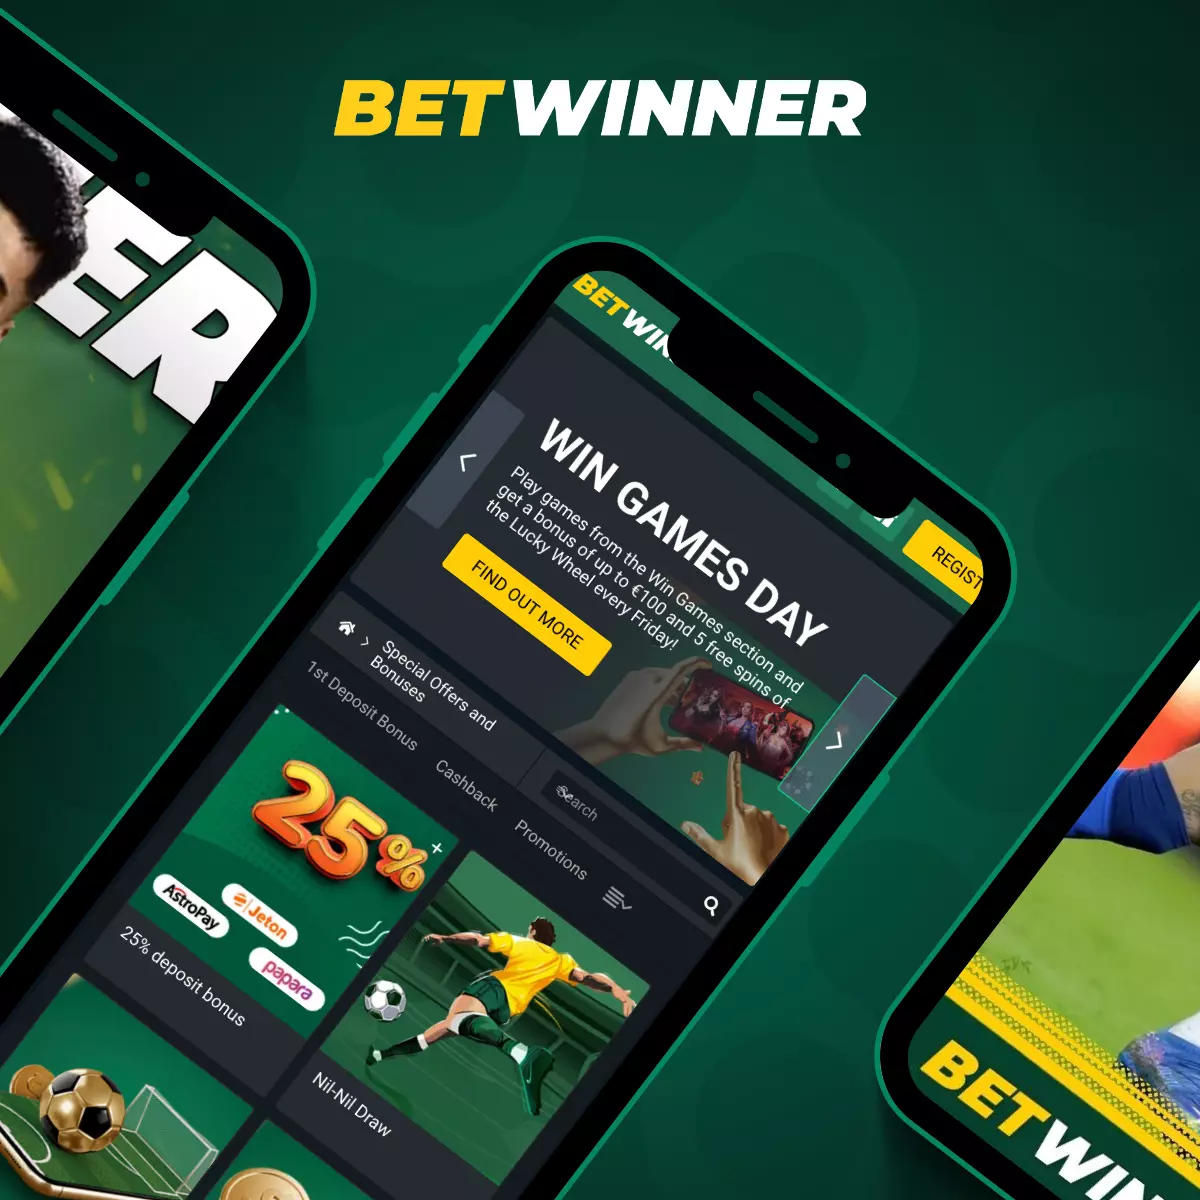 It's All About Betwinner Registration